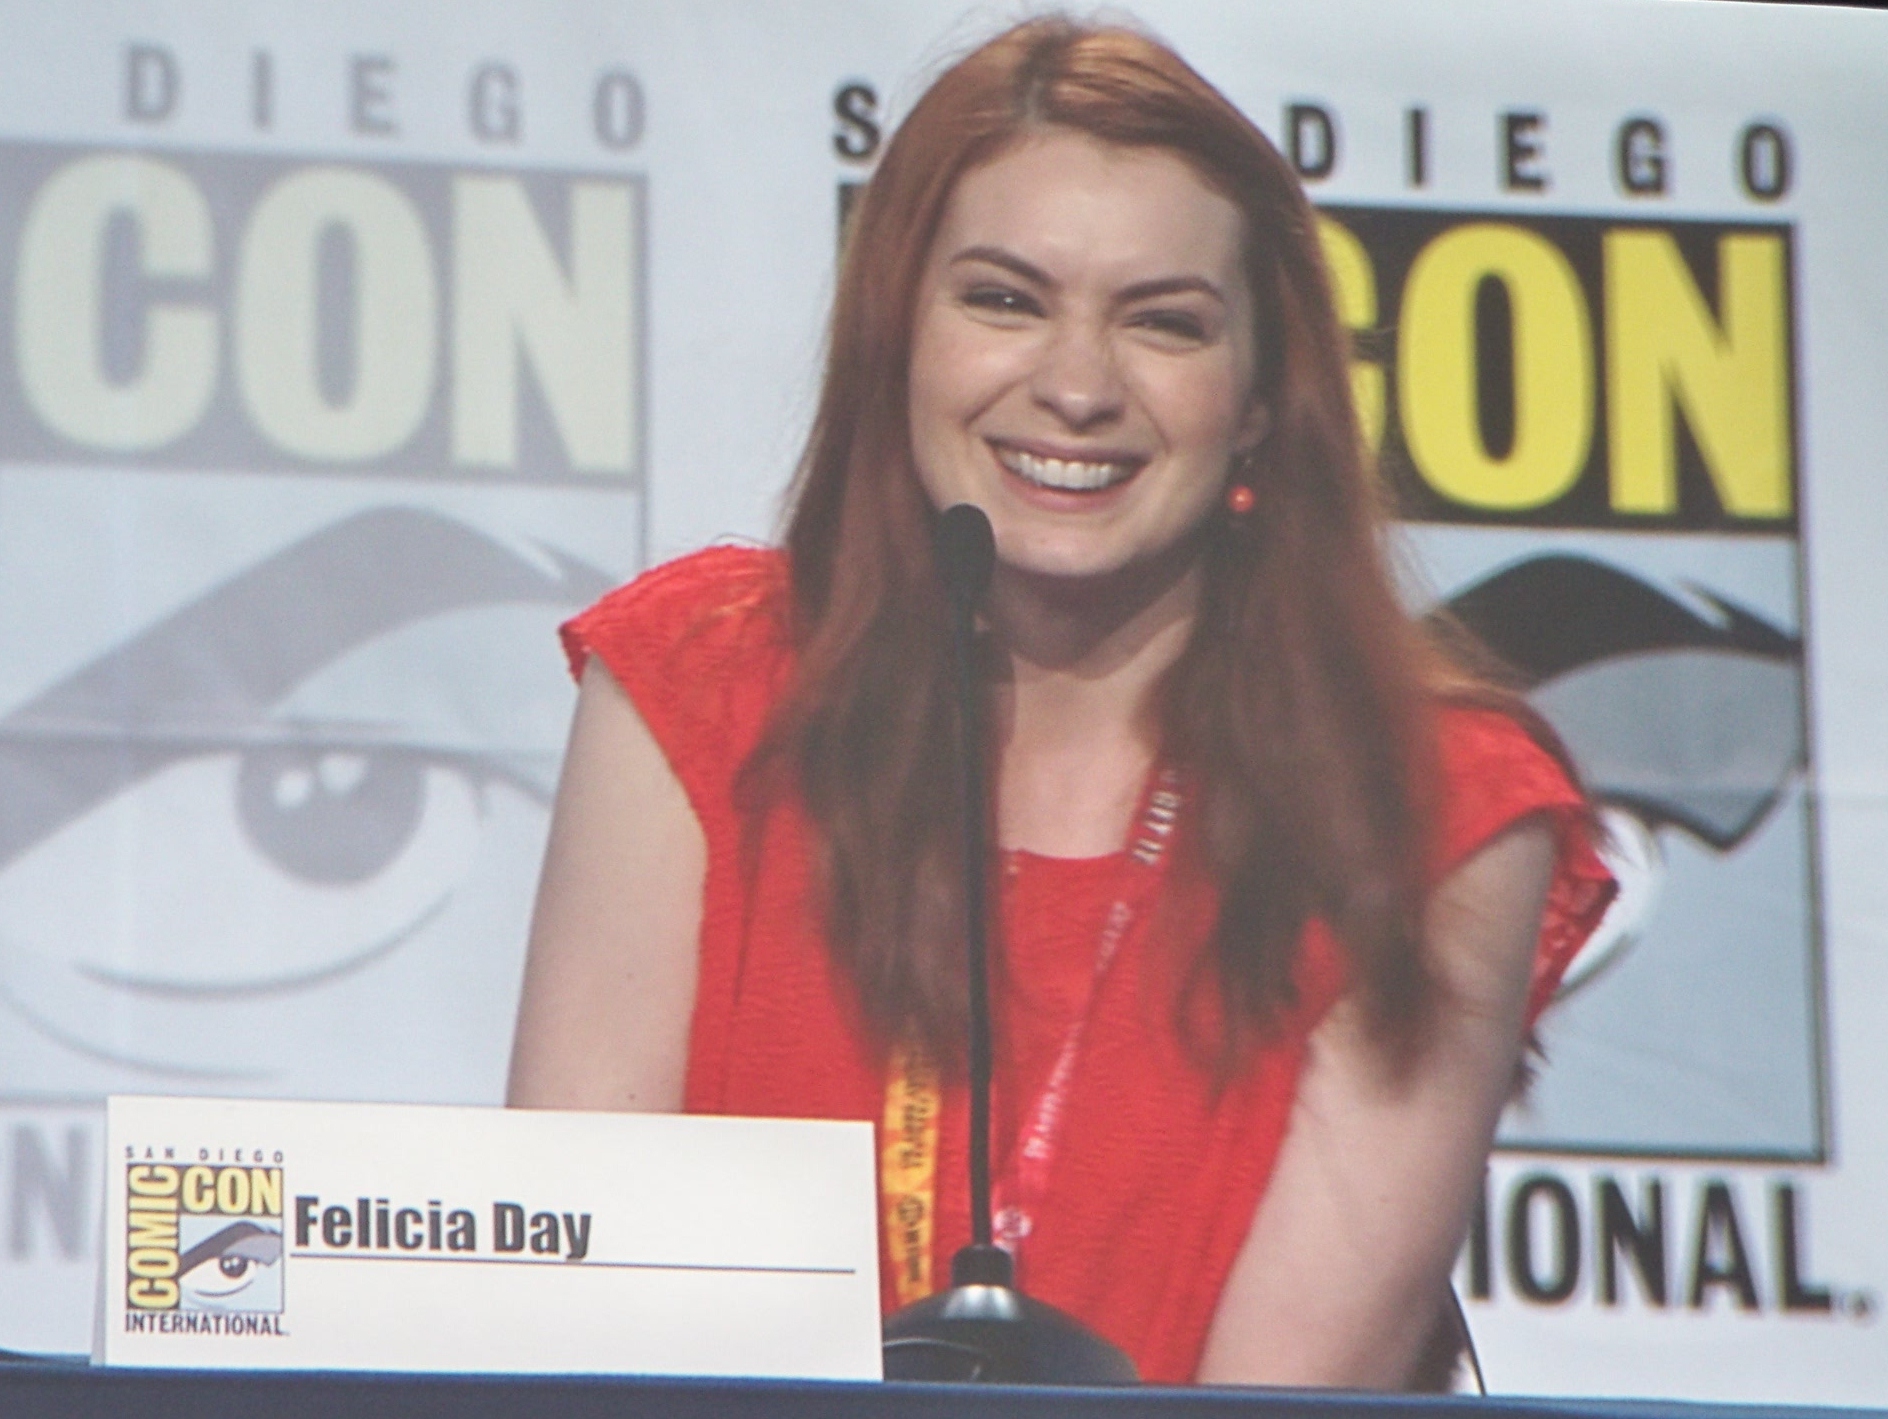 SDCC 2012: Geek and Sundry Announces New Shows, Return of The Guild